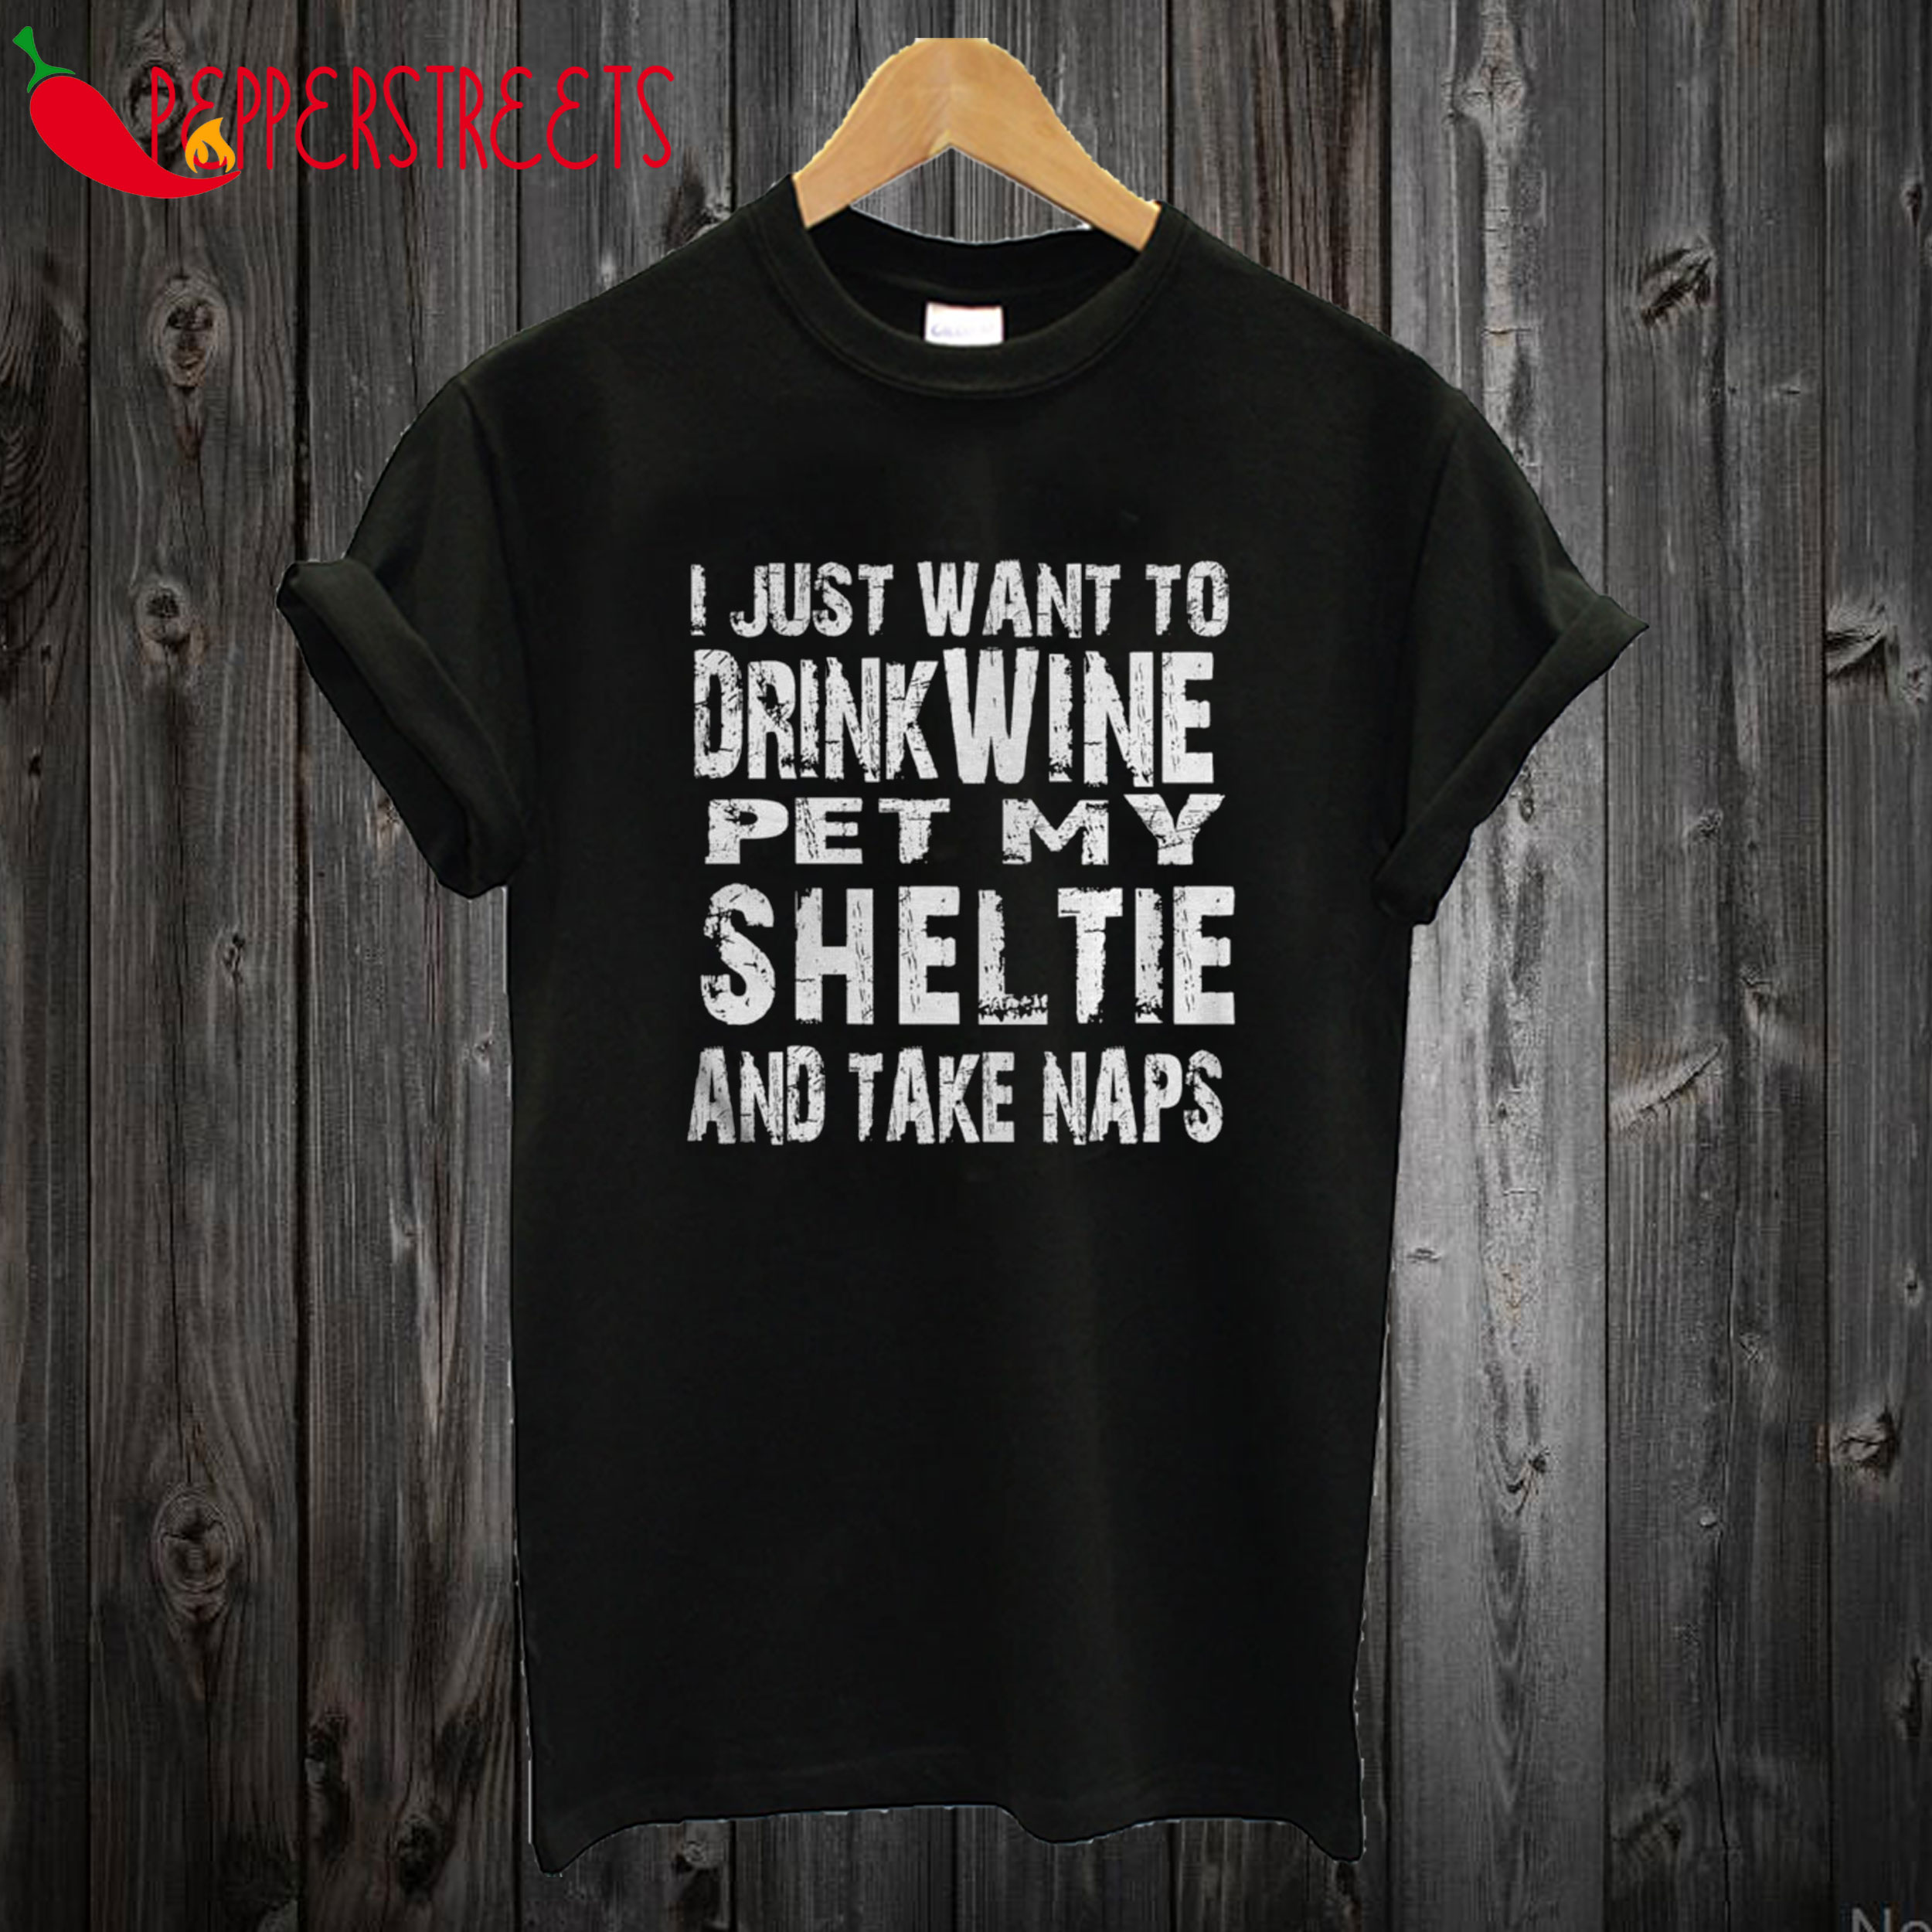 I just want to drink wine pet my sheltie and take naps T Shirt